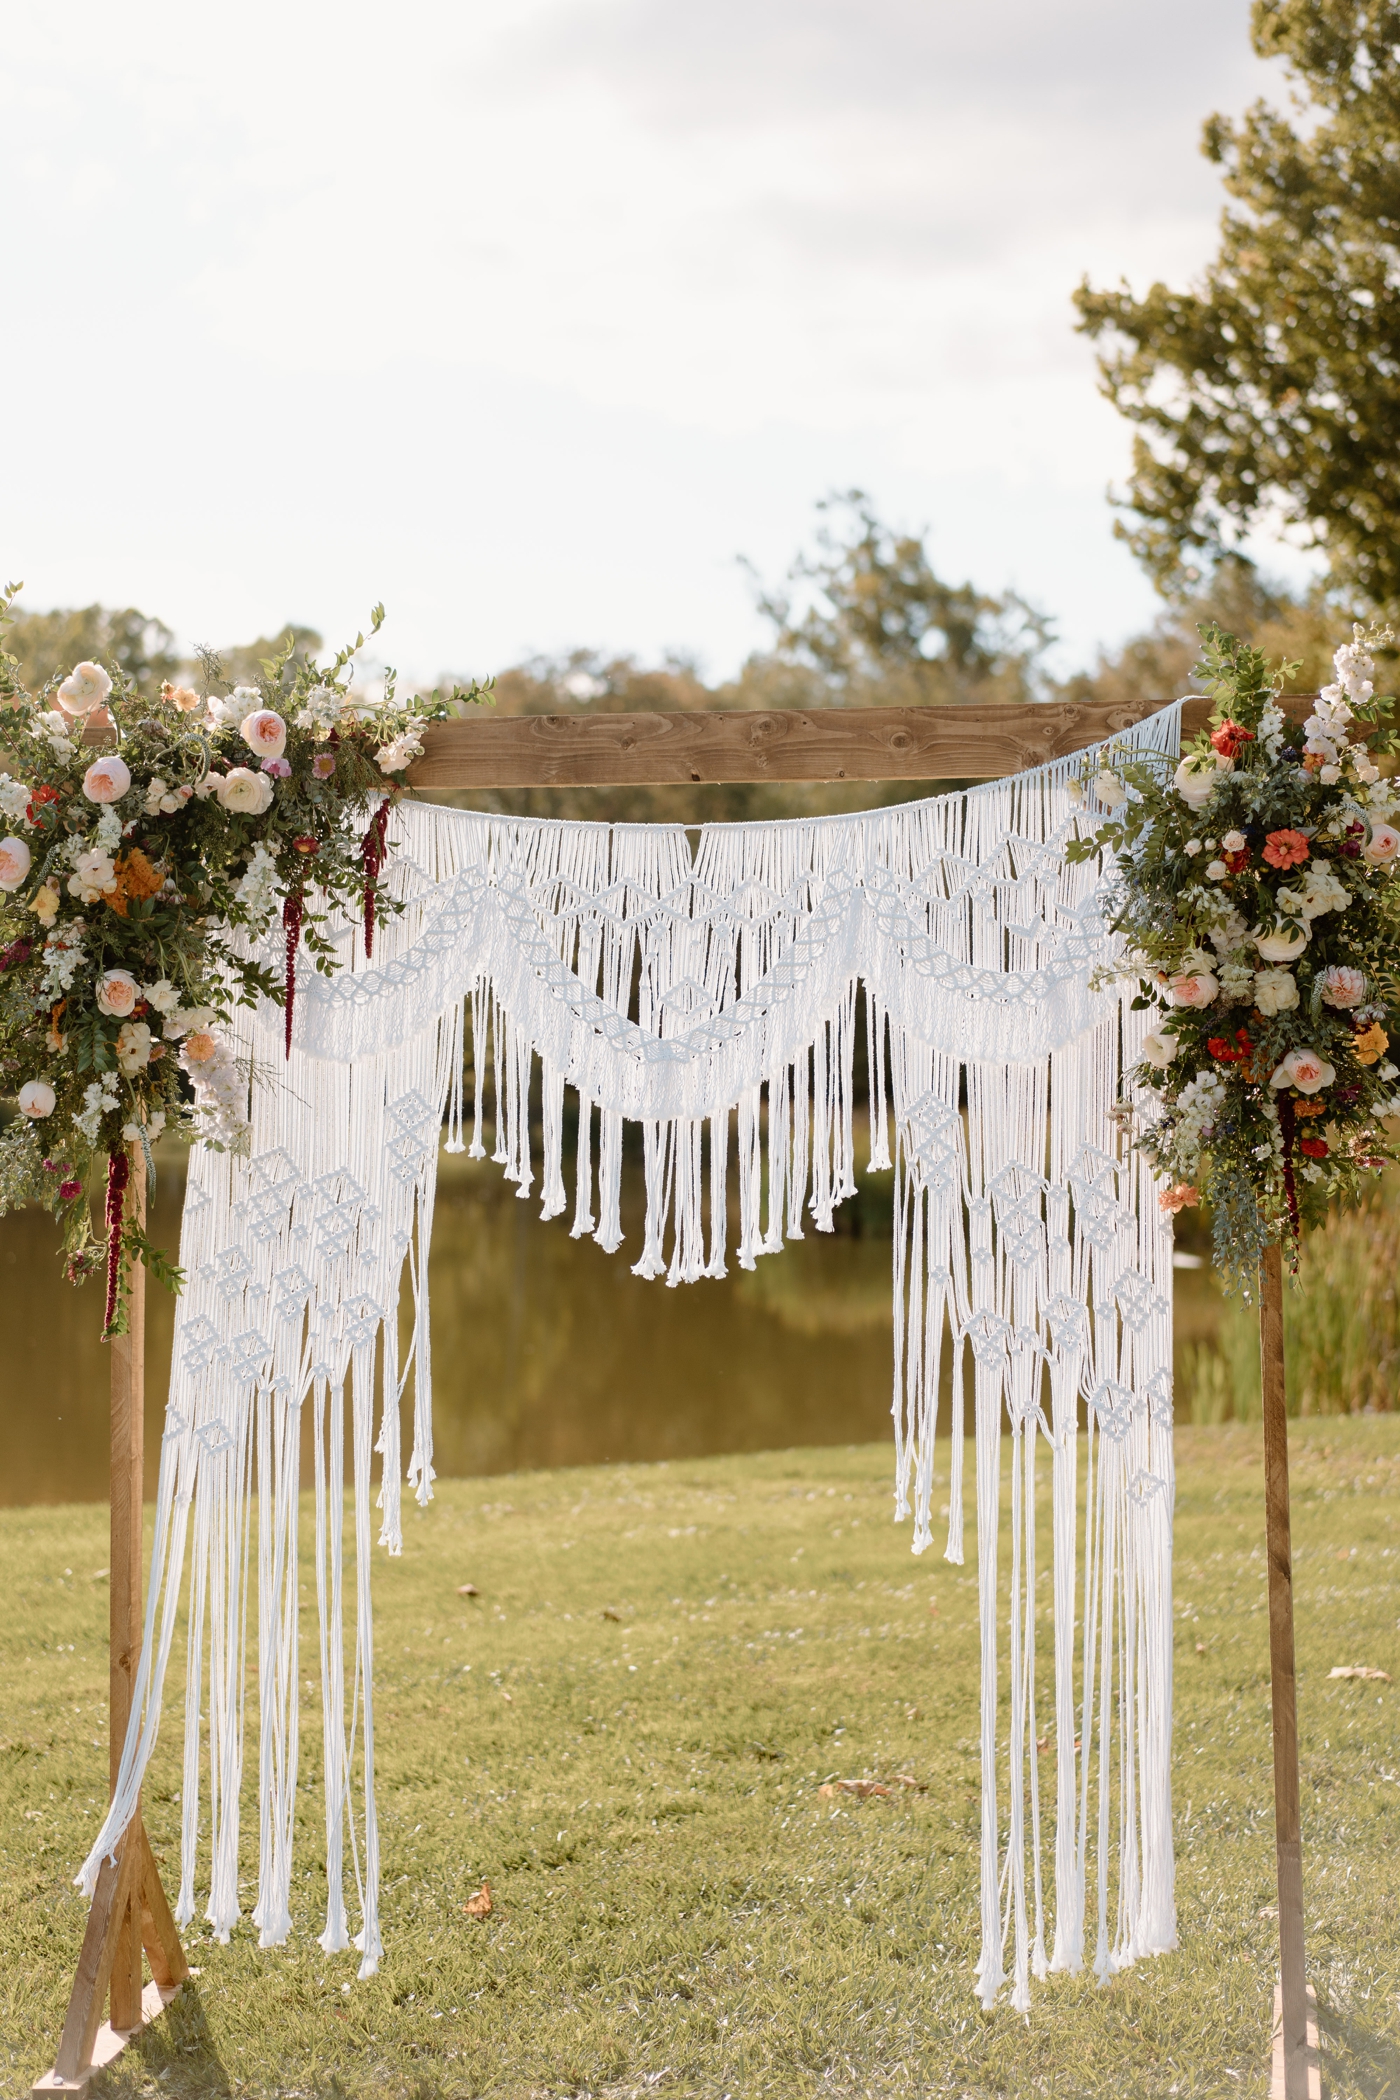 Wooden wedding arch with a macrame backdrop and wildflowers